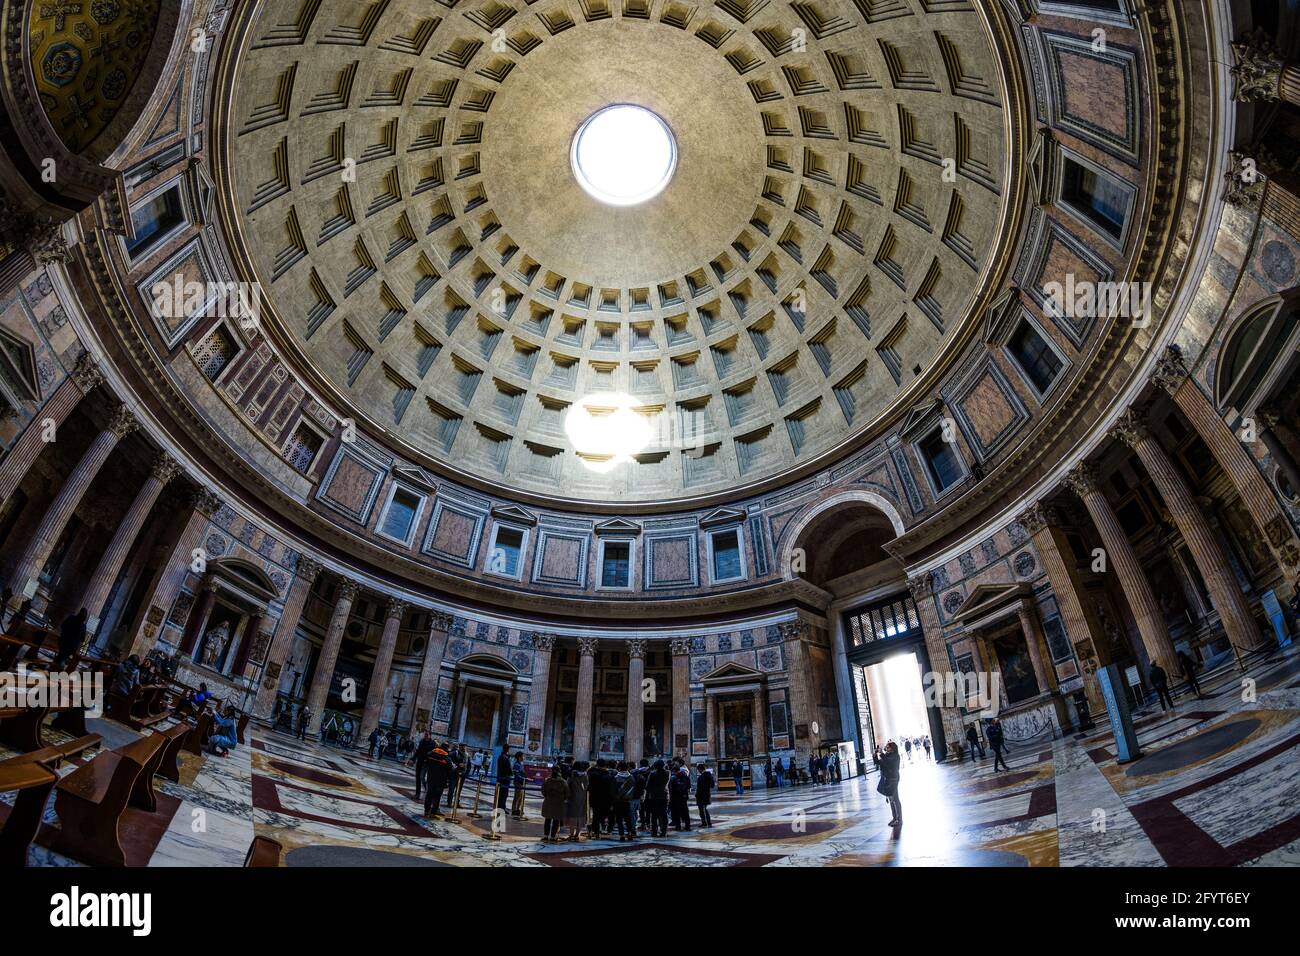 The interior decoration of Pantheon in Rome Stock Photo